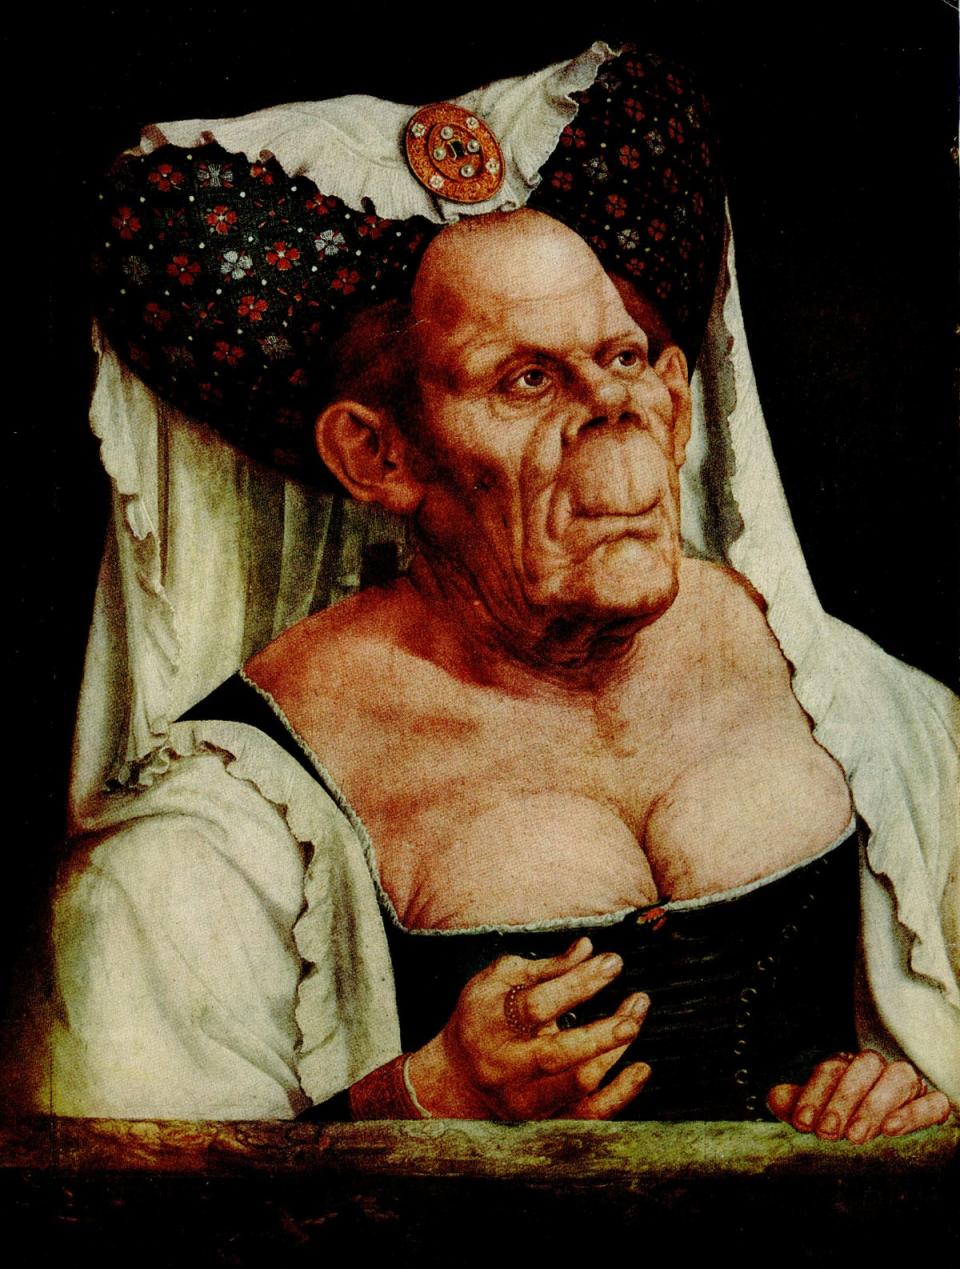 An Old Woman or The Ugly Duchess by Quinten Massys (Hulton Archive / Stringer / Getty Images)